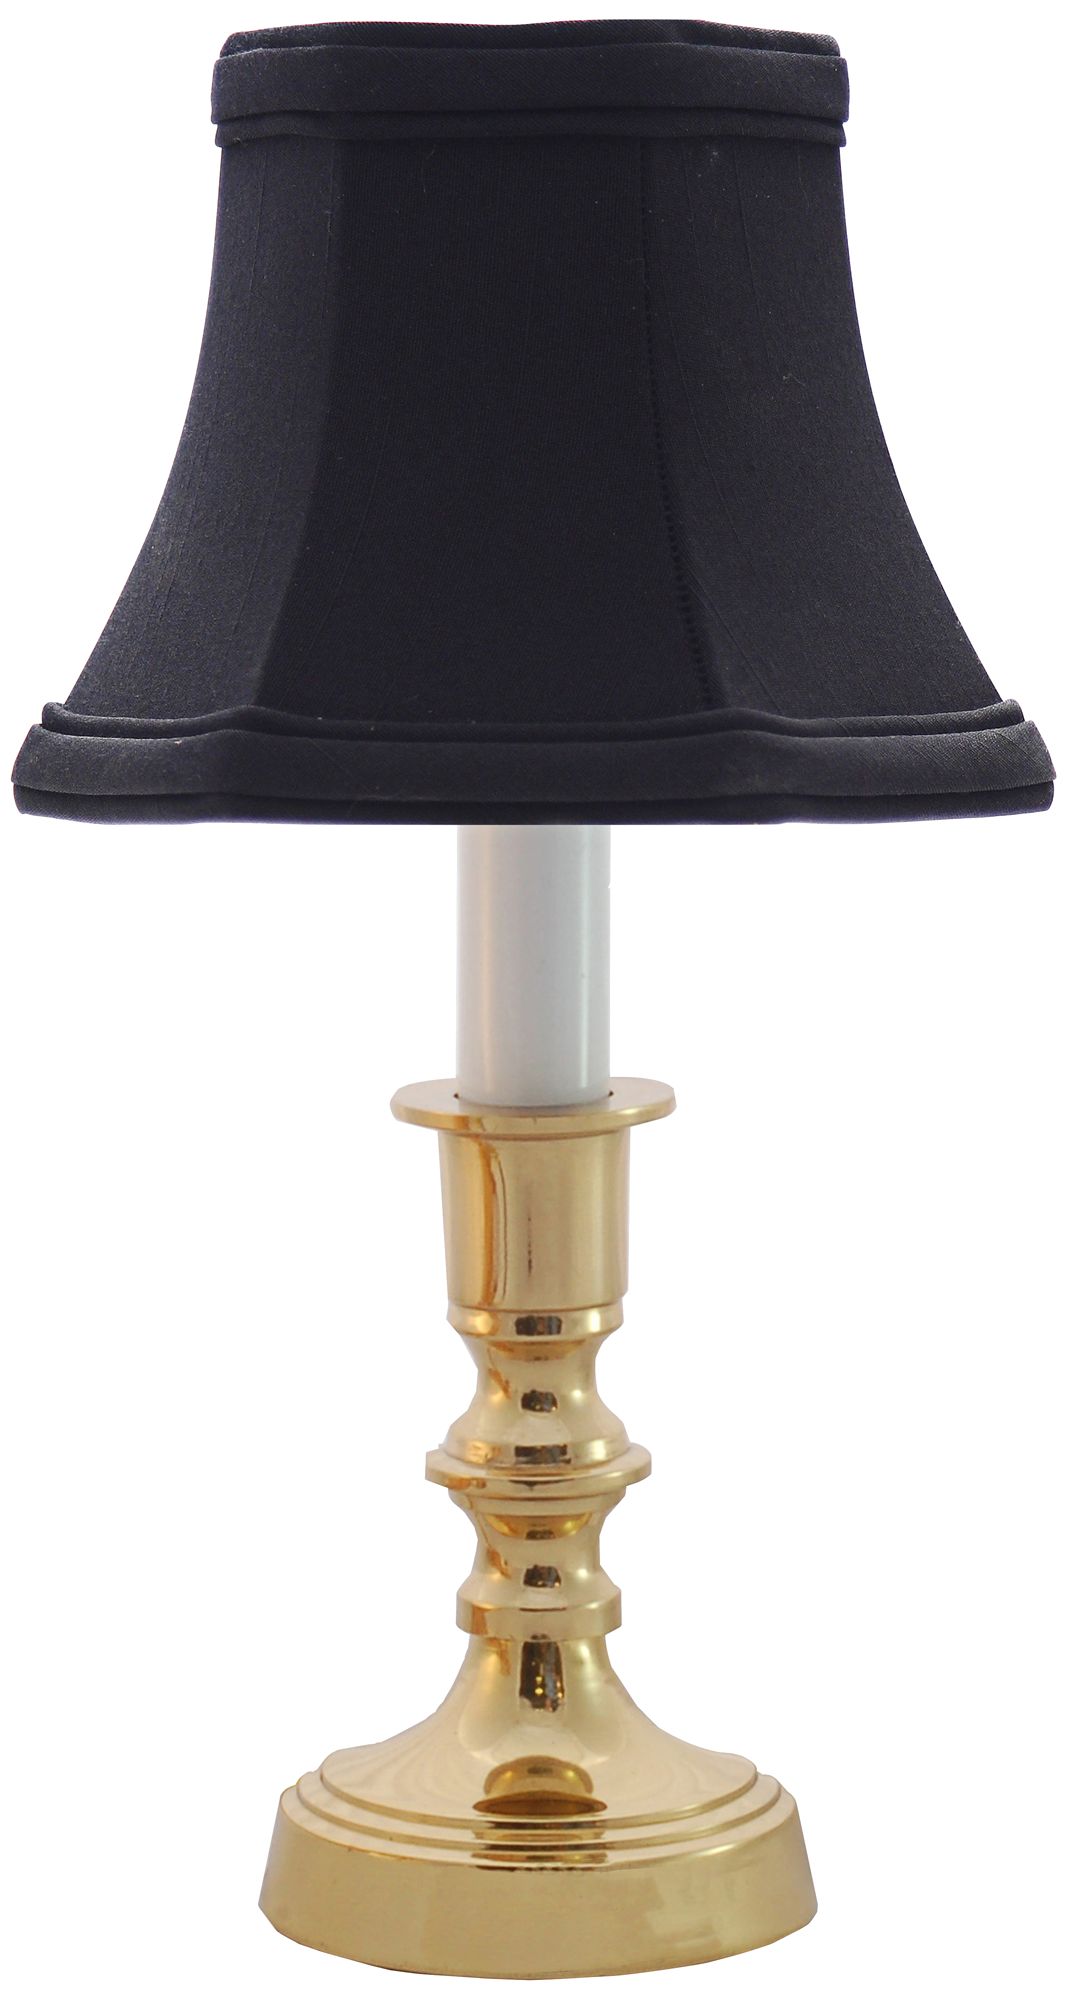 Beacon Falls Polished Brass Table Lamp with Black Bell Shade